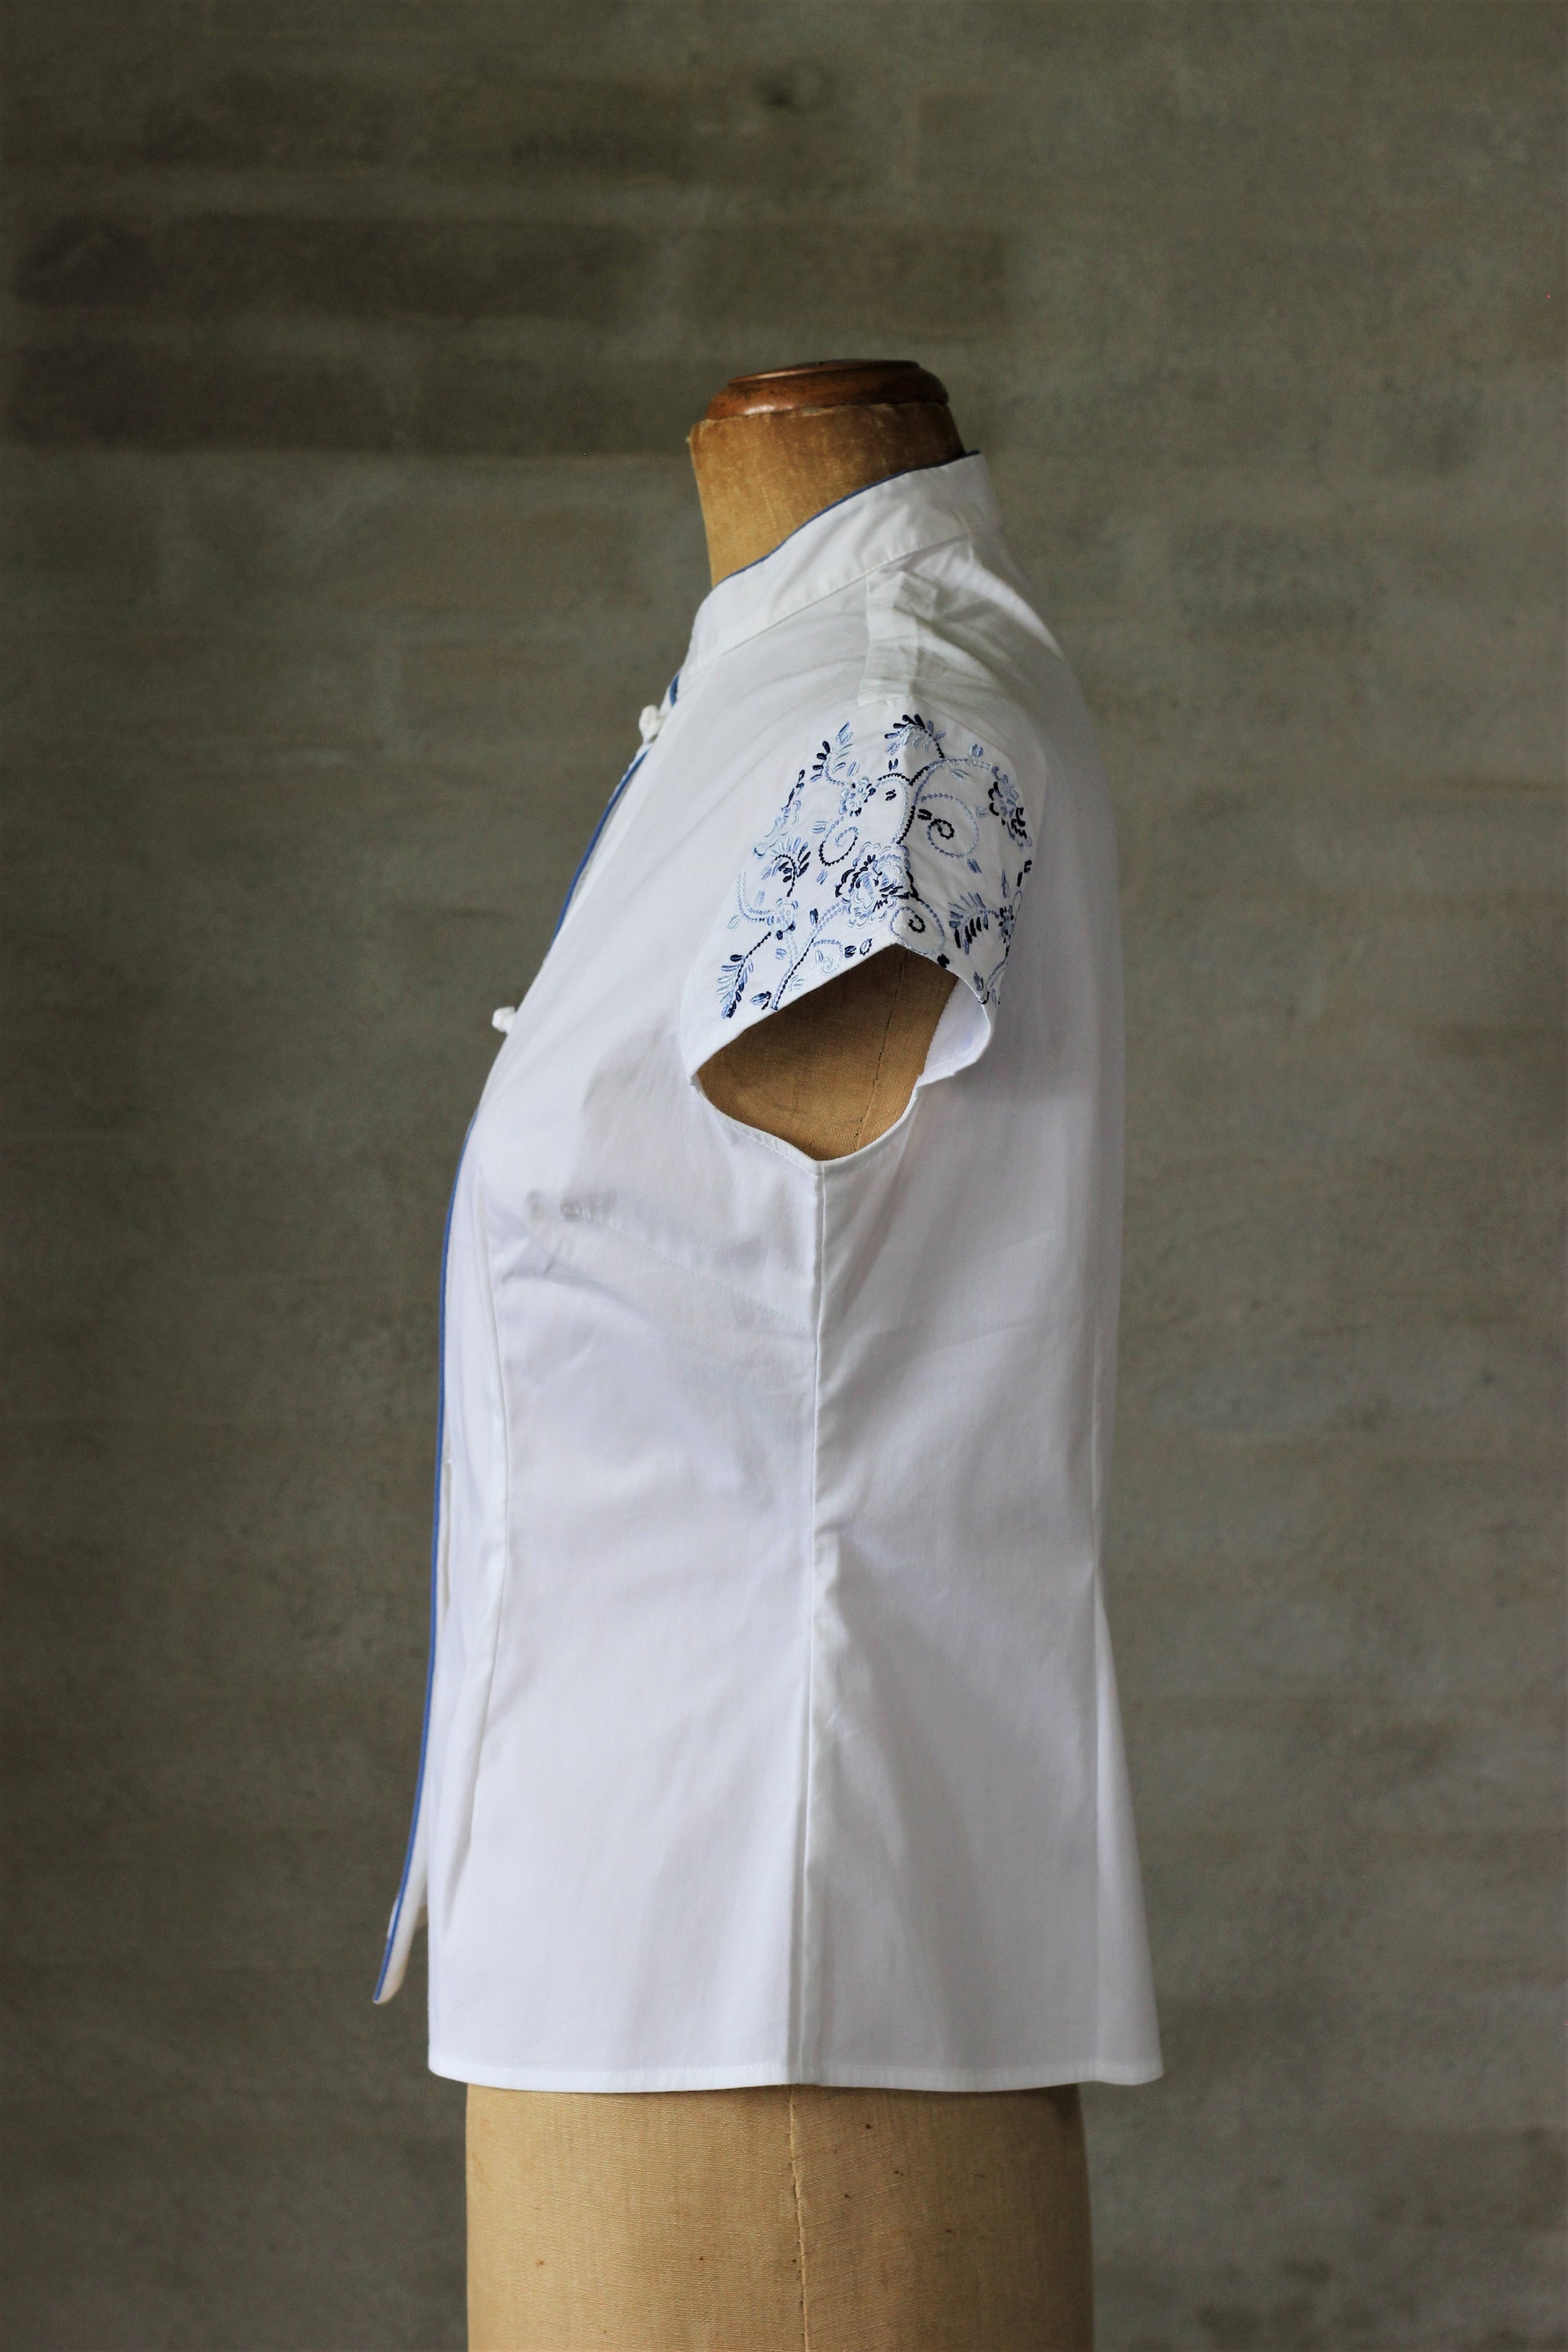 1990s White Blouse With Blue Embroidery/Size M